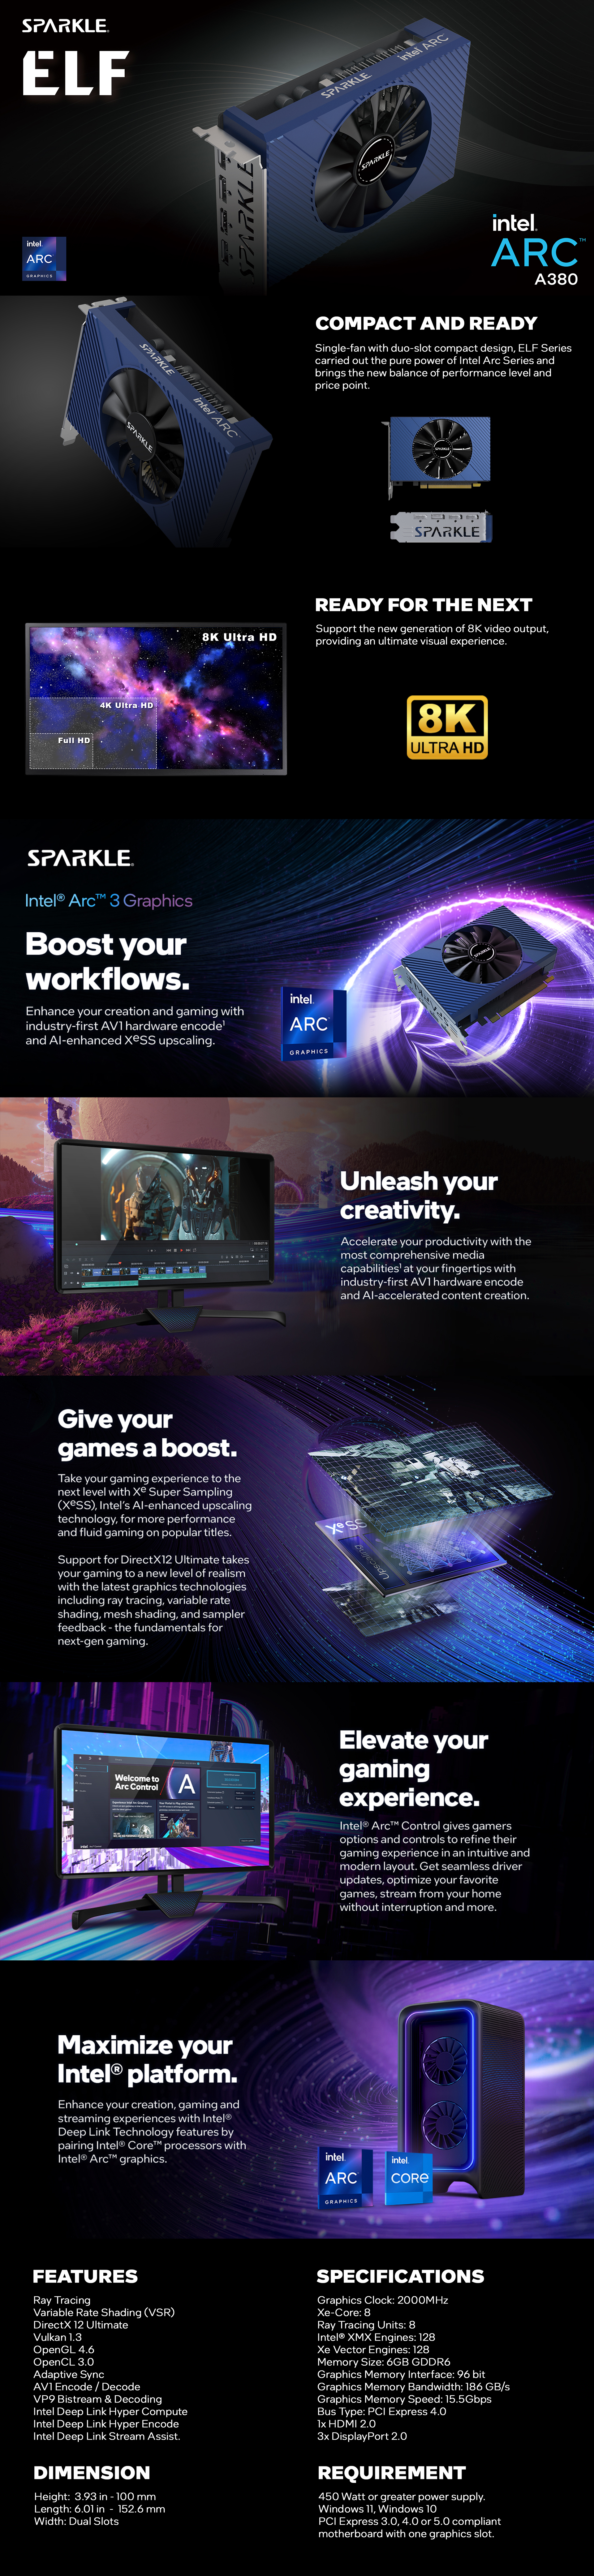 A large marketing image providing additional information about the product SPARKLE Intel Arc A380 ELF 6GB GDDR6 - Additional alt info not provided